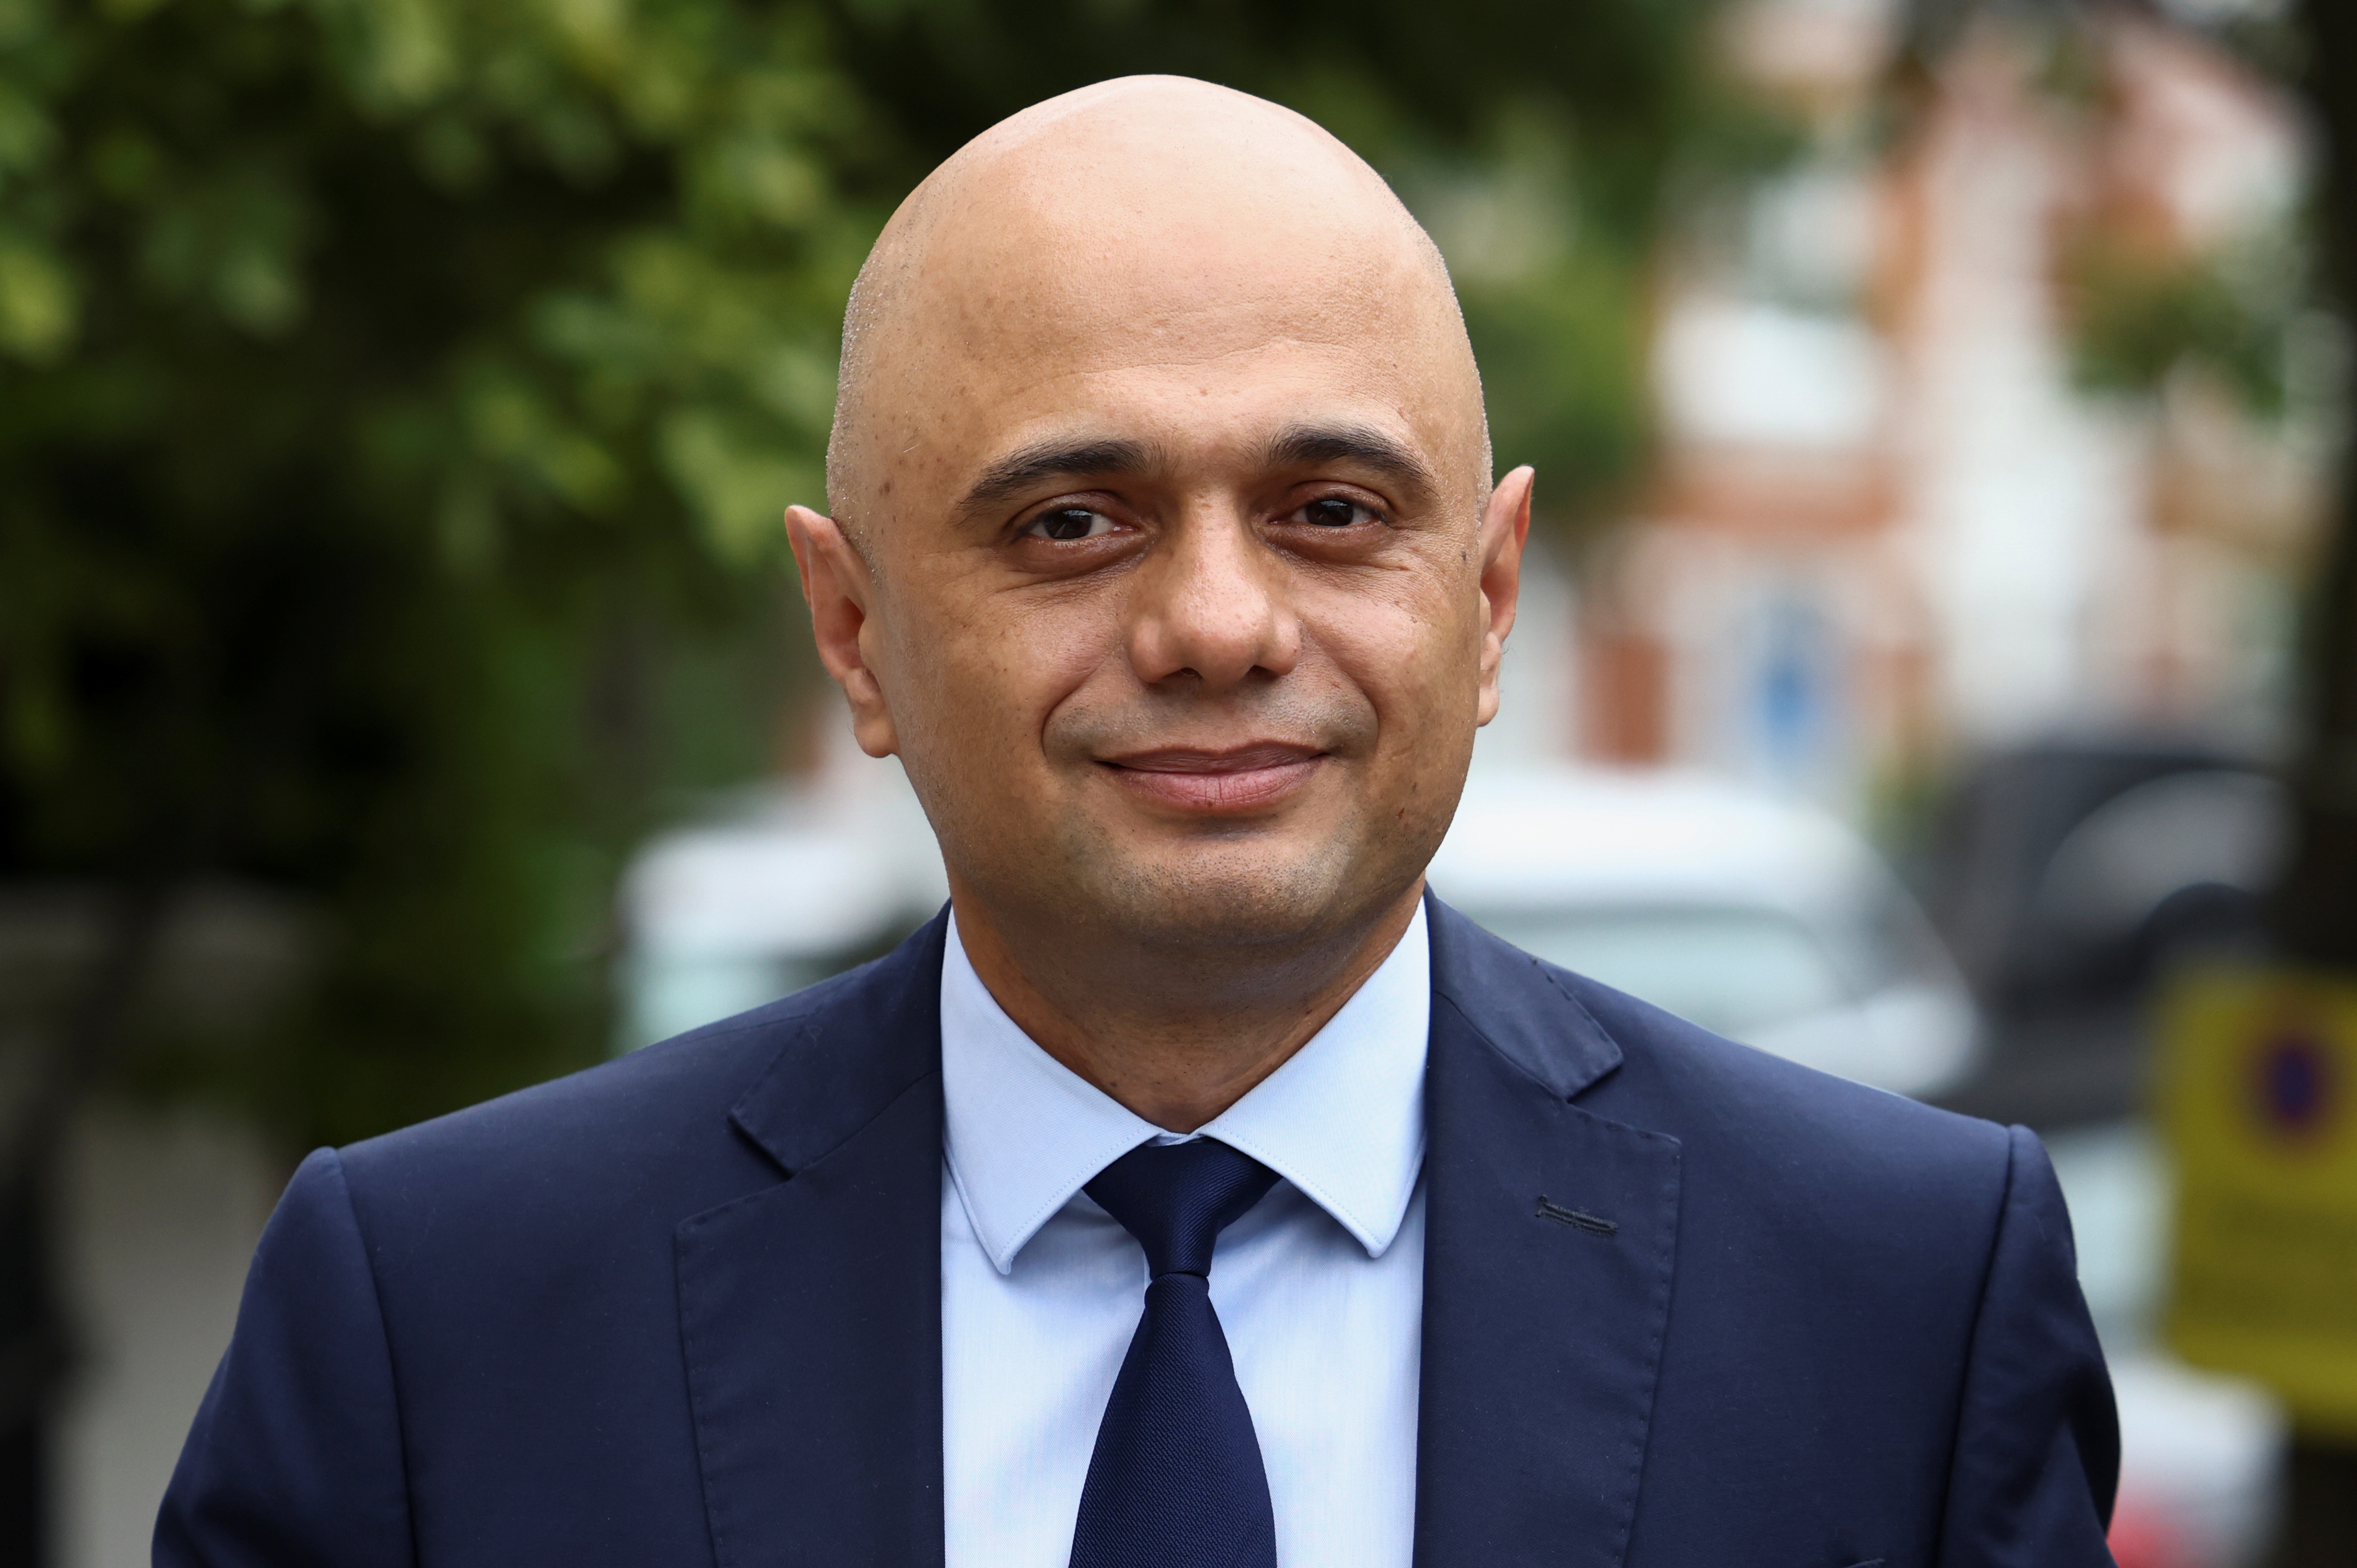 UK's Javid wants COVID restrictions lifted as soon as possible